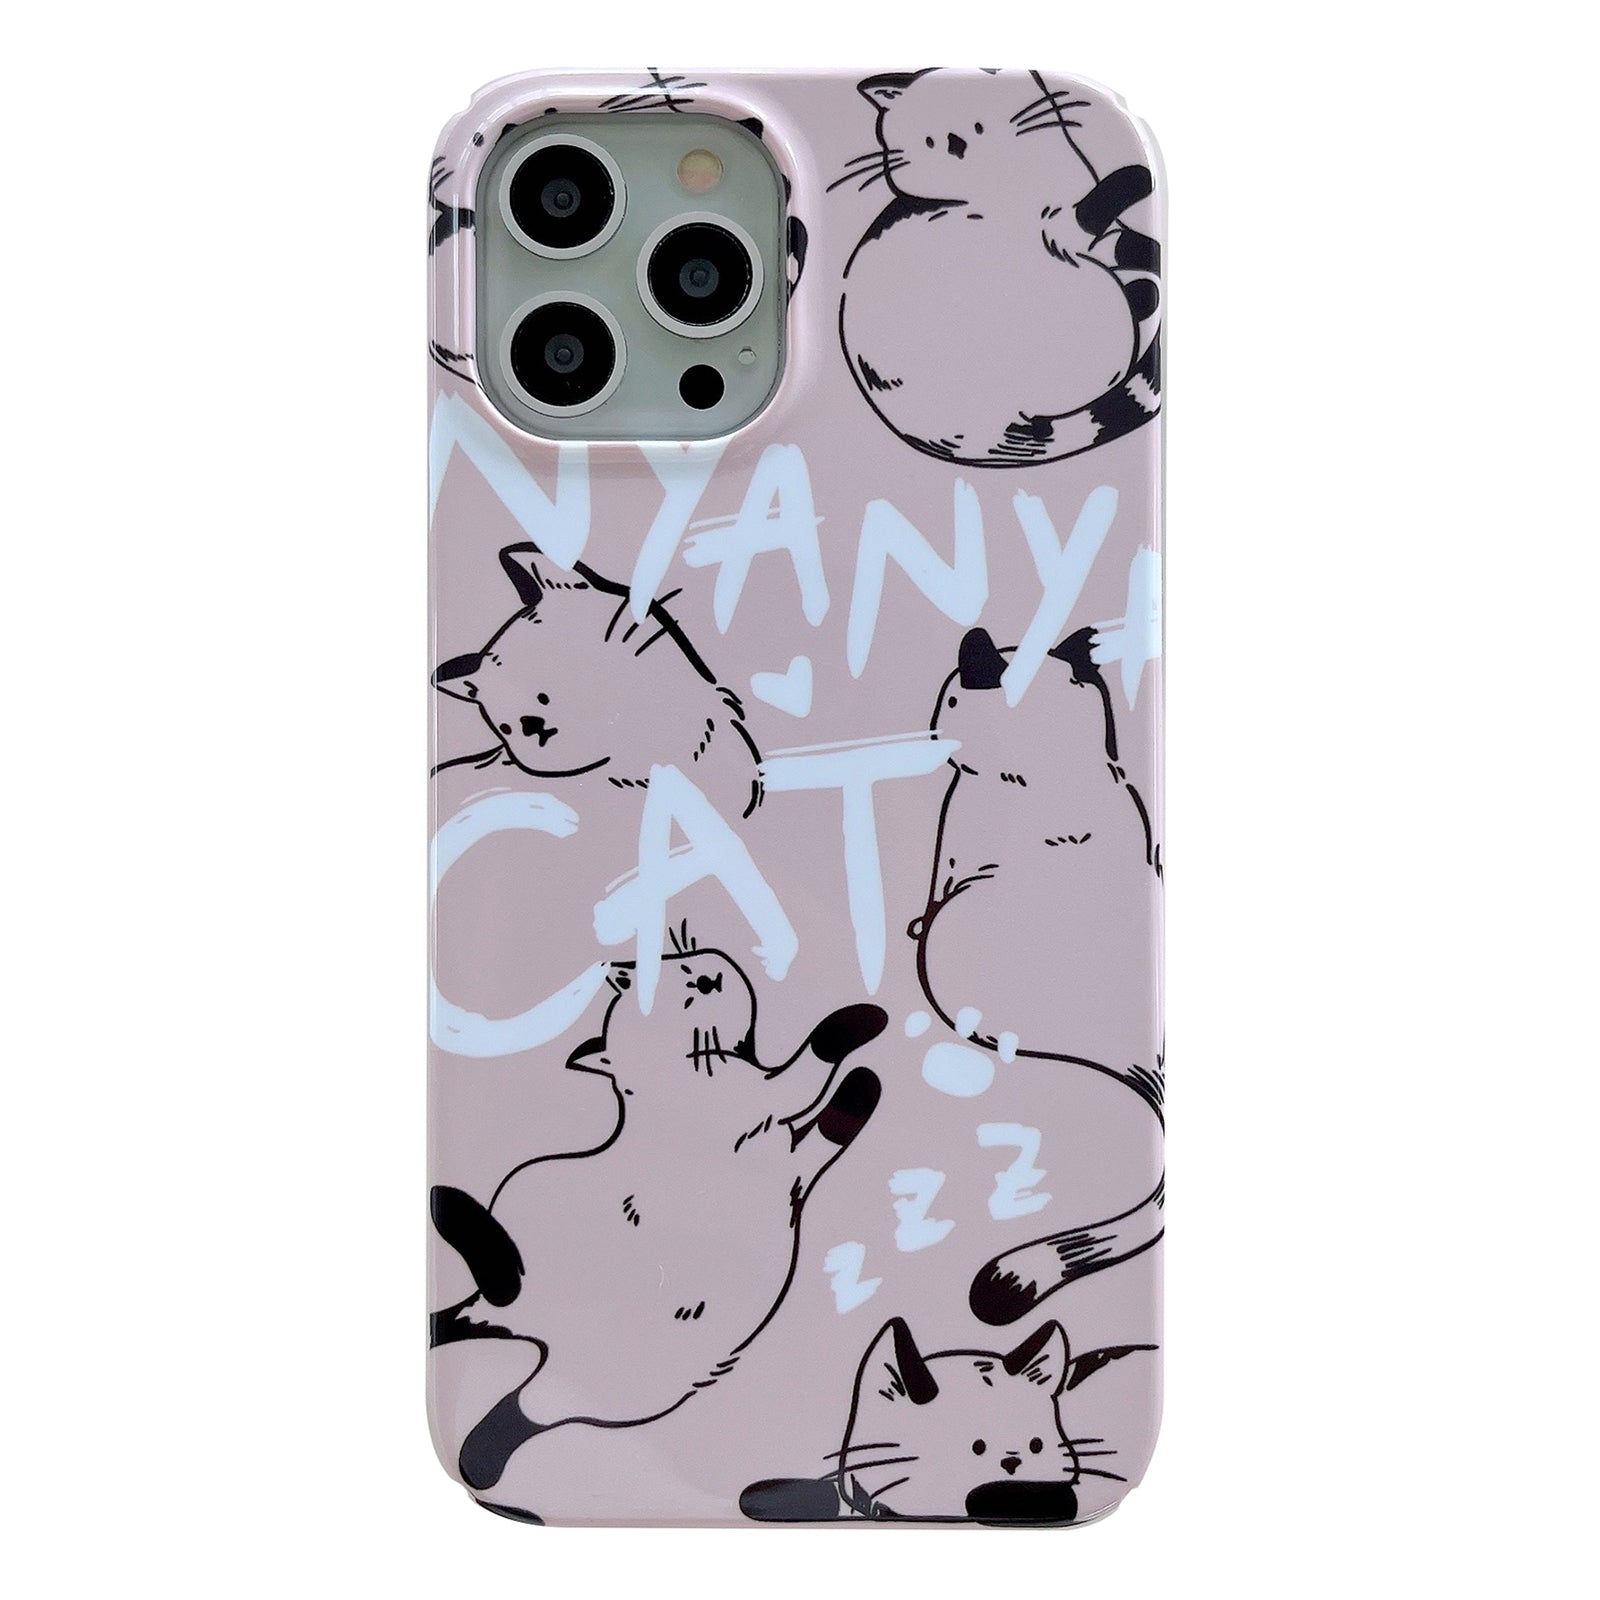 Hard PC Phone Cover for iPhone 12 Pro 6.1 inch Pattern Printing Anti-Drop Glossy Phone Case - Cat